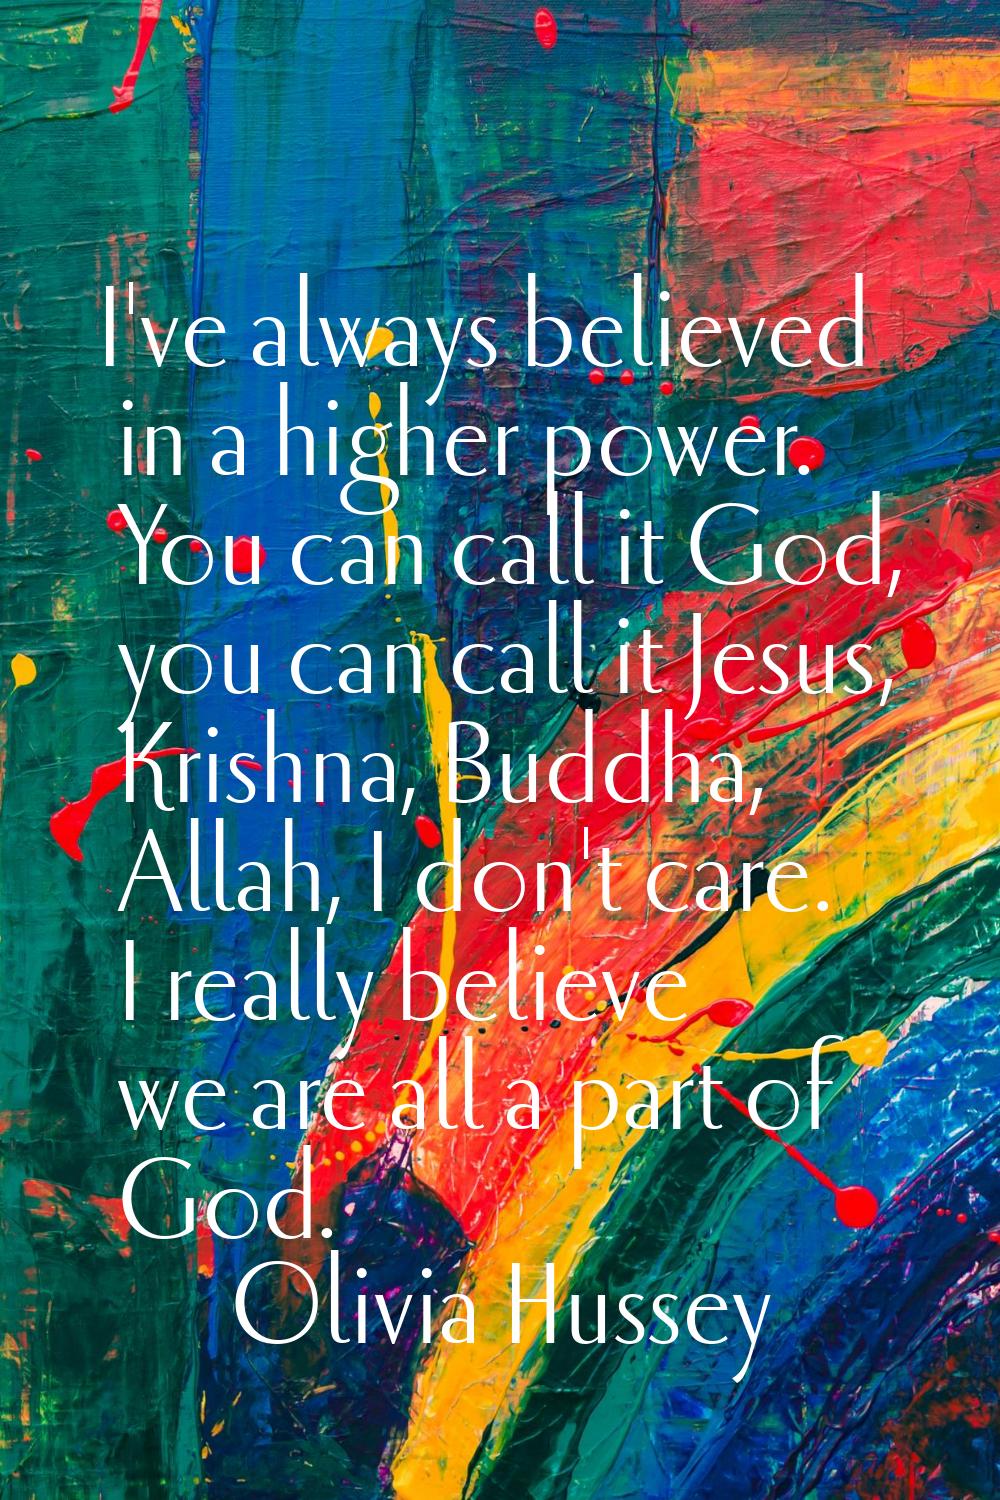 I've always believed in a higher power. You can call it God, you can call it Jesus, Krishna, Buddha